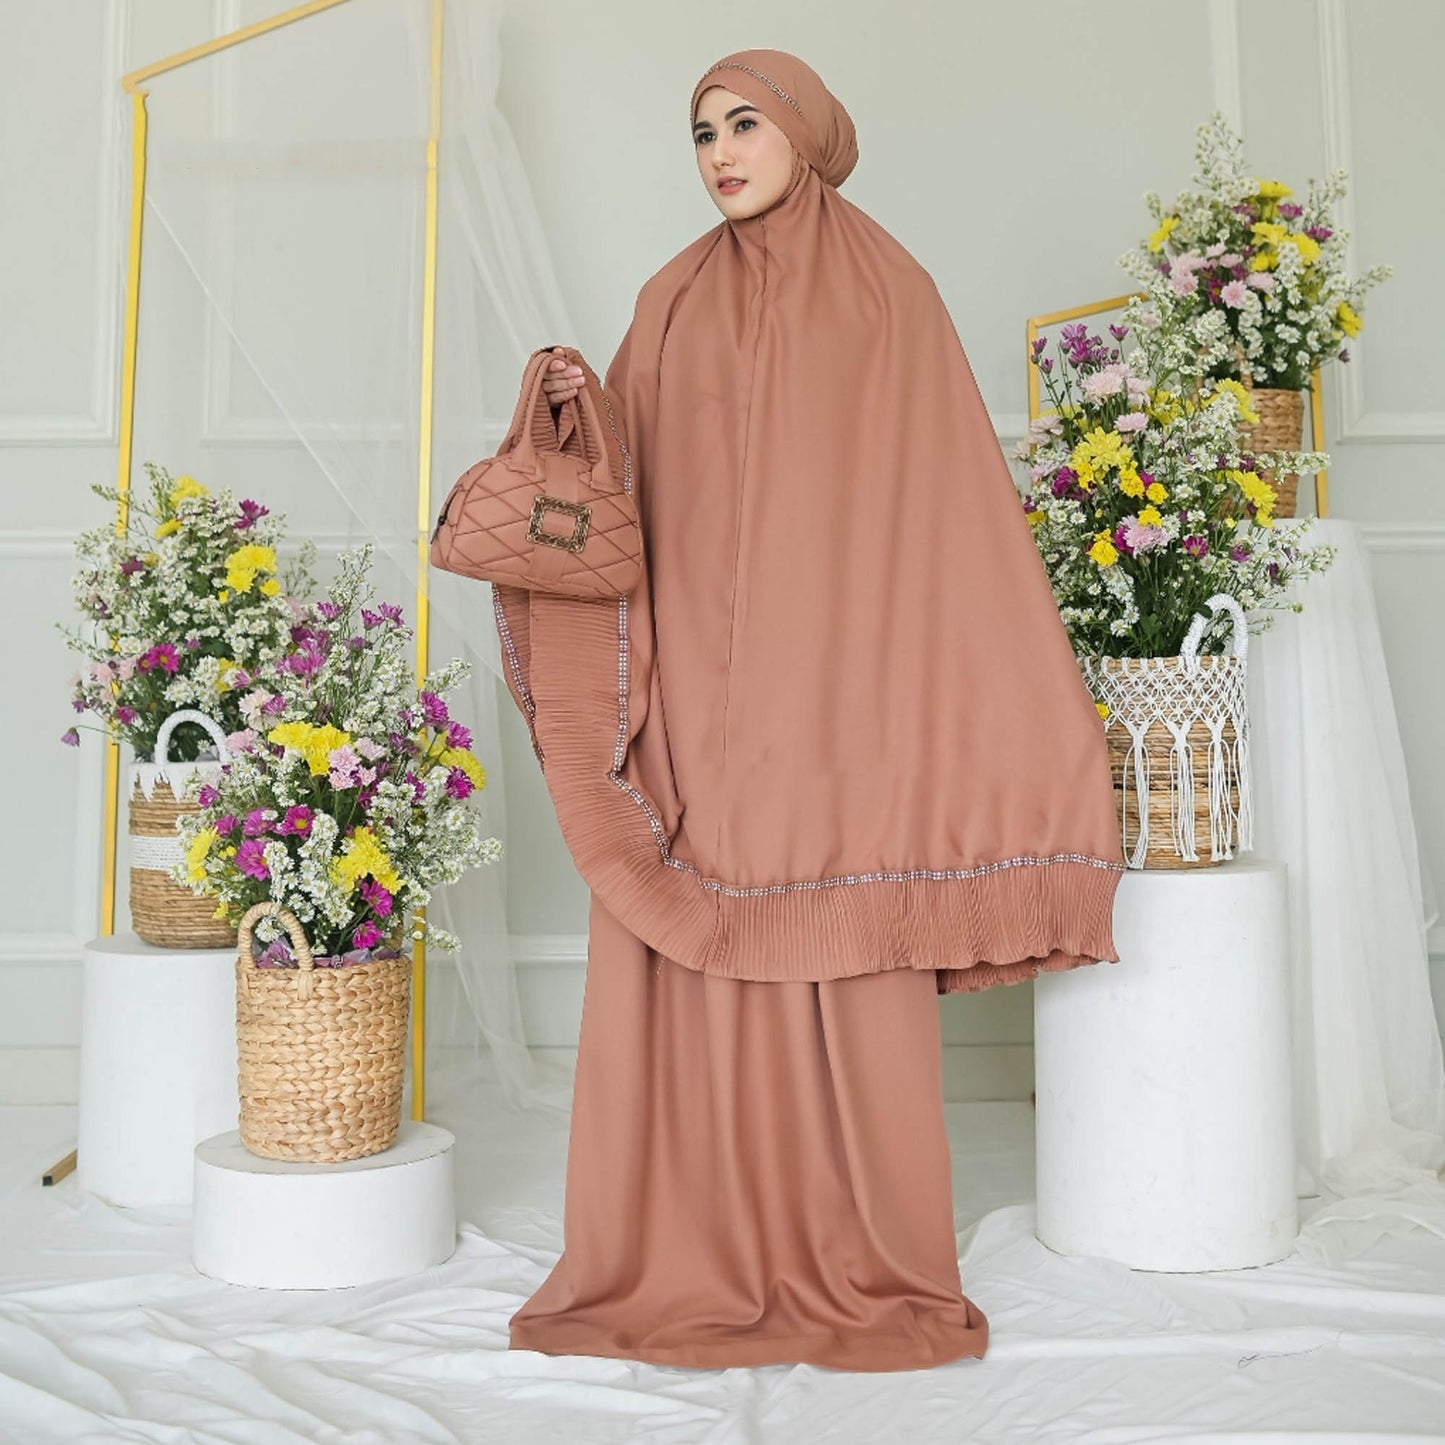 3in1 Adult Mukena: A Unique Touch for High Quality Worship, Muslim prayer outfit, Gamis dress, Prayer dress women, Jilbab dress